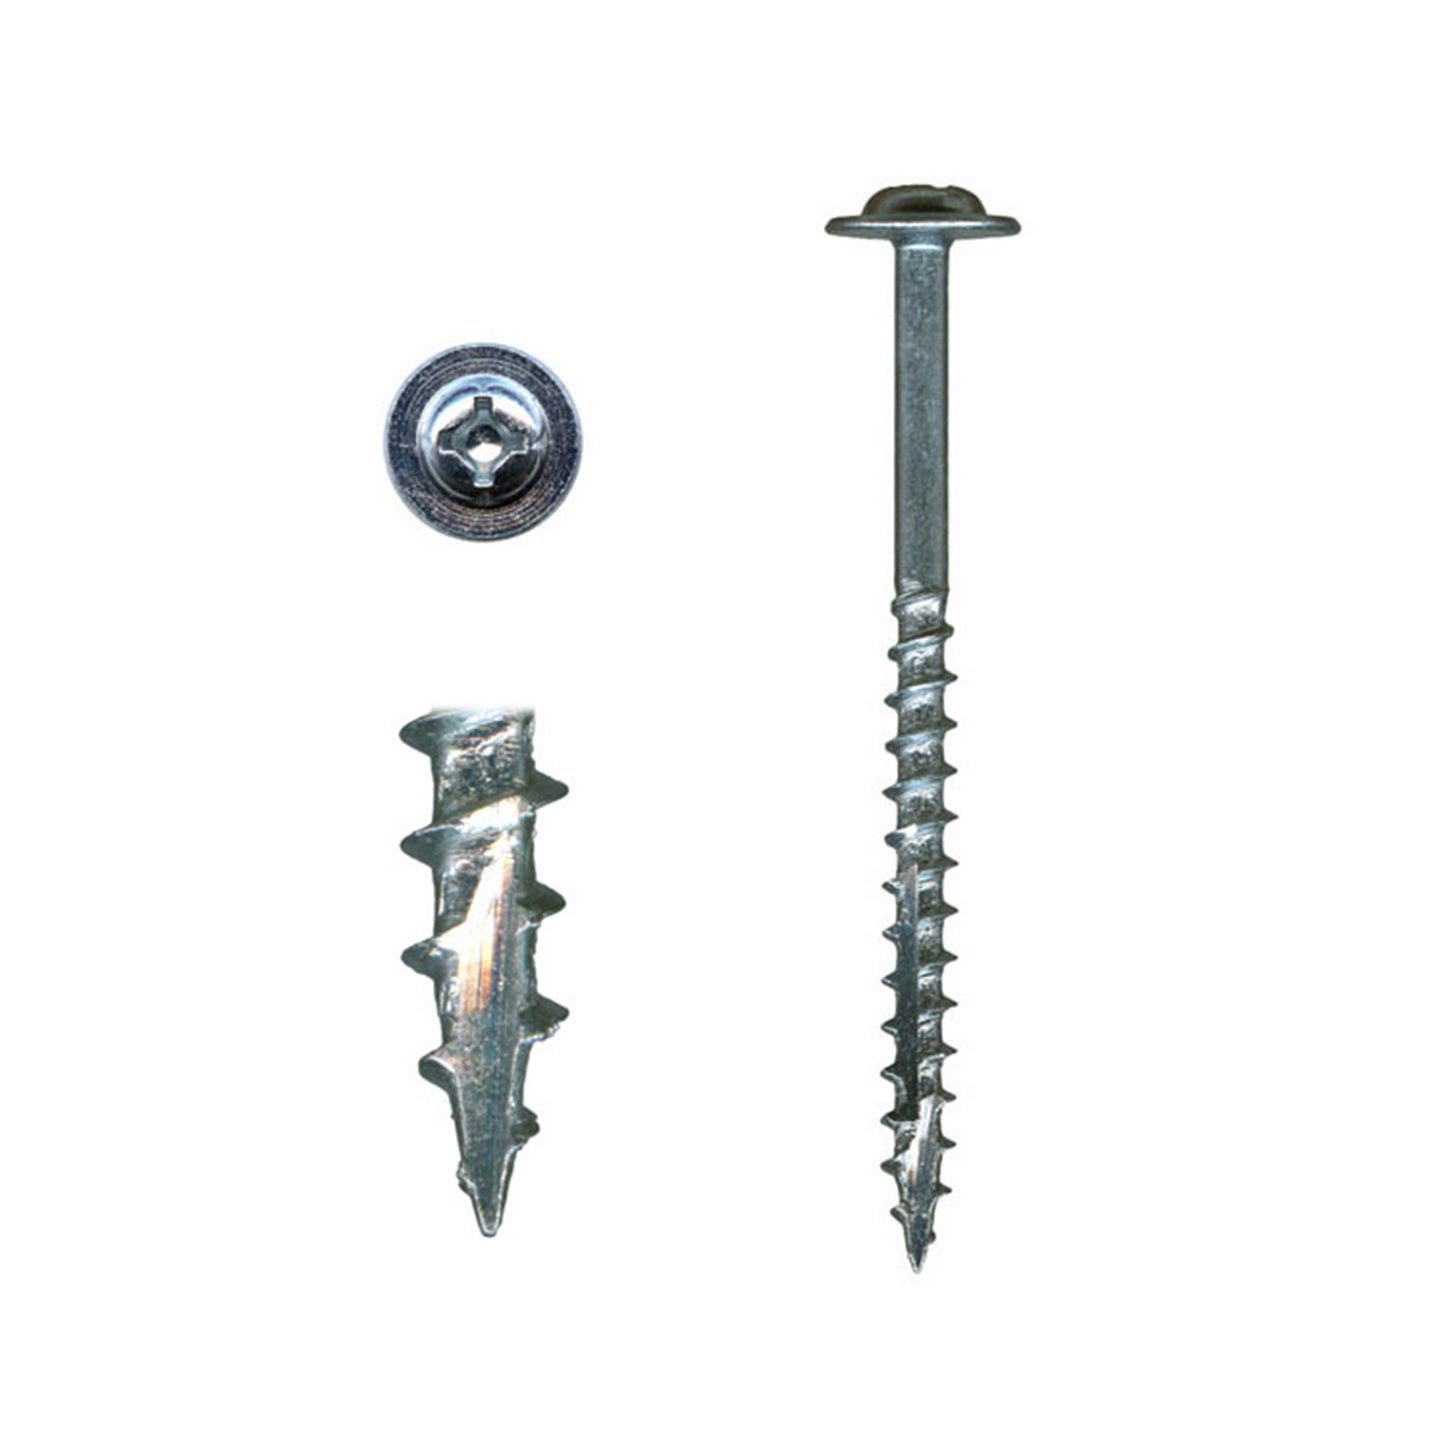 10 x 3 Cabinet Installation Screws, Washer Head, Combo Drive, Zinc with White Painted Head, 100-Piece alt 0